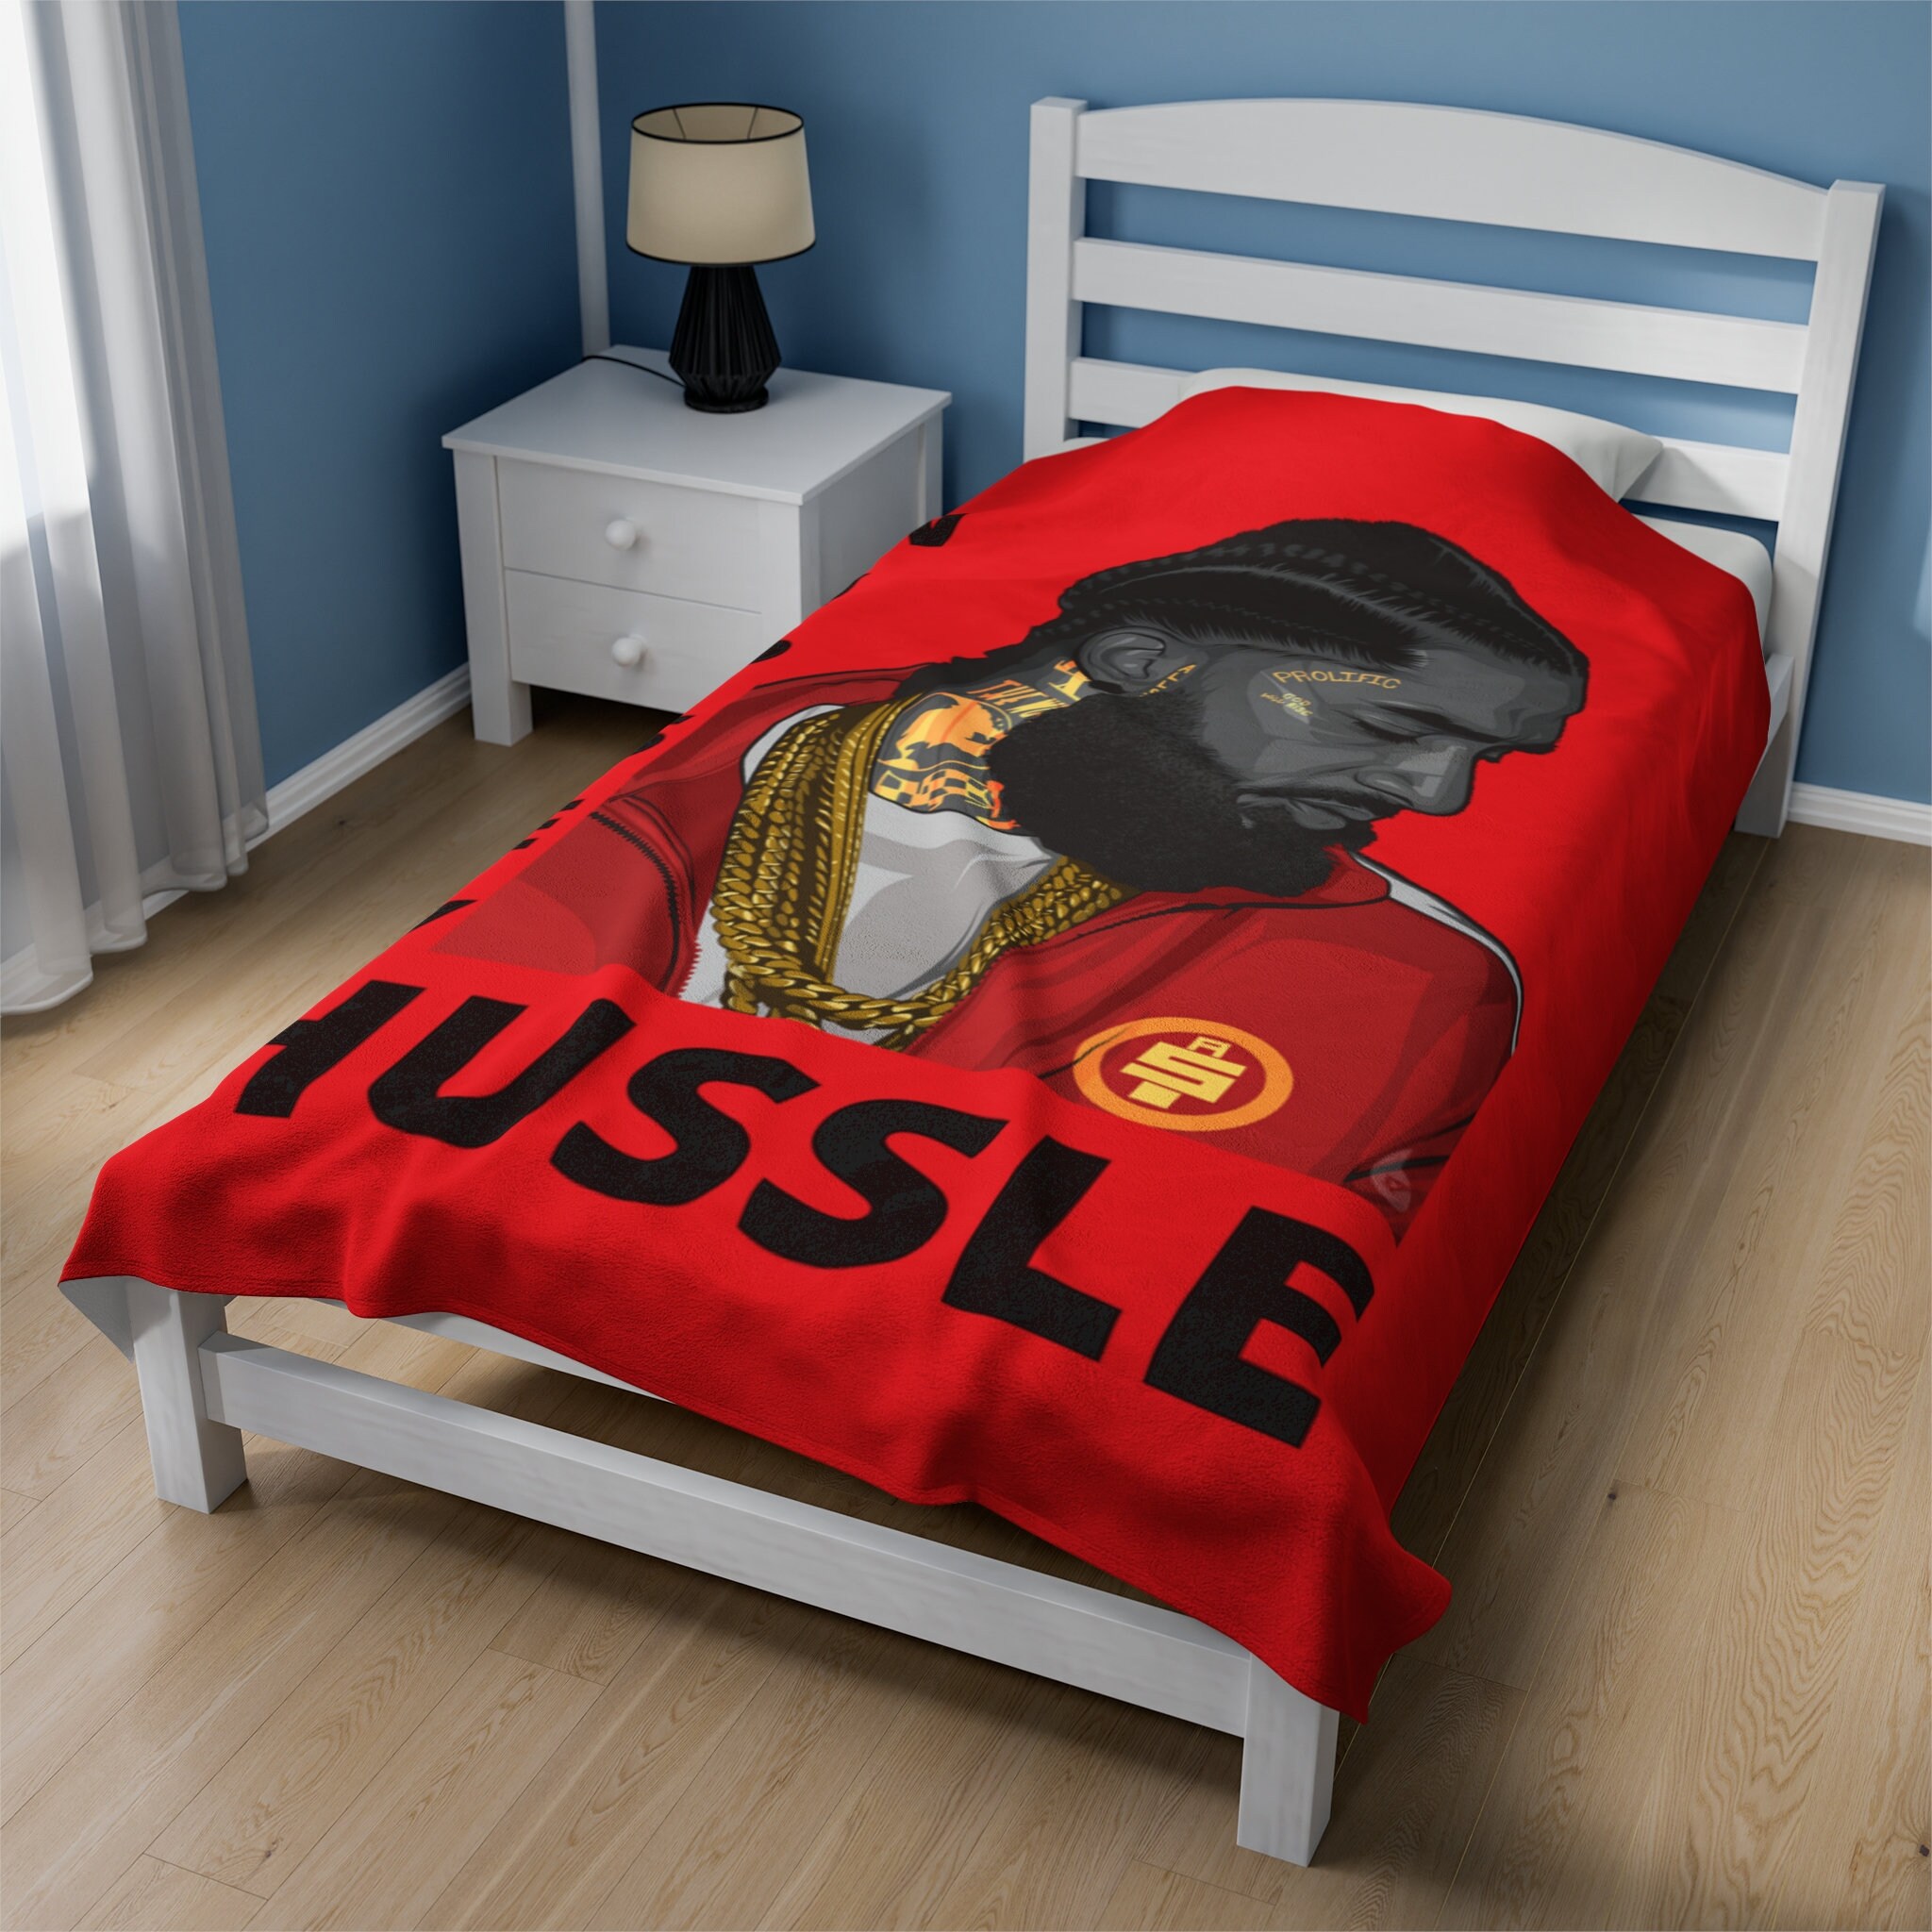 Blankets - The Hussle Brand